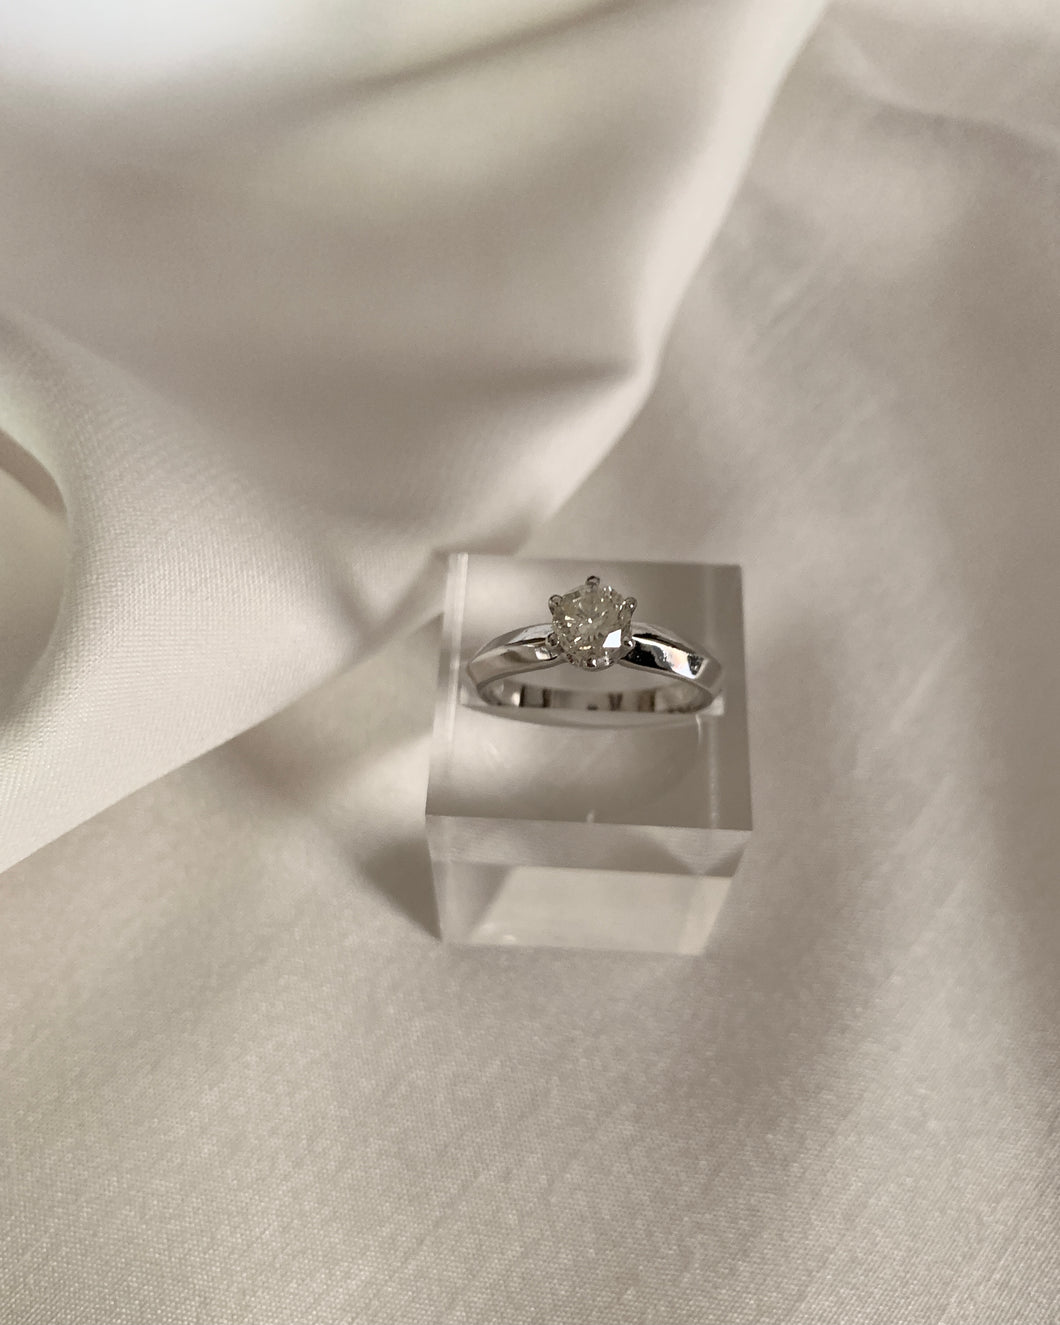 A white gold ring with a knife edge band design with a round diamond as a center stone.